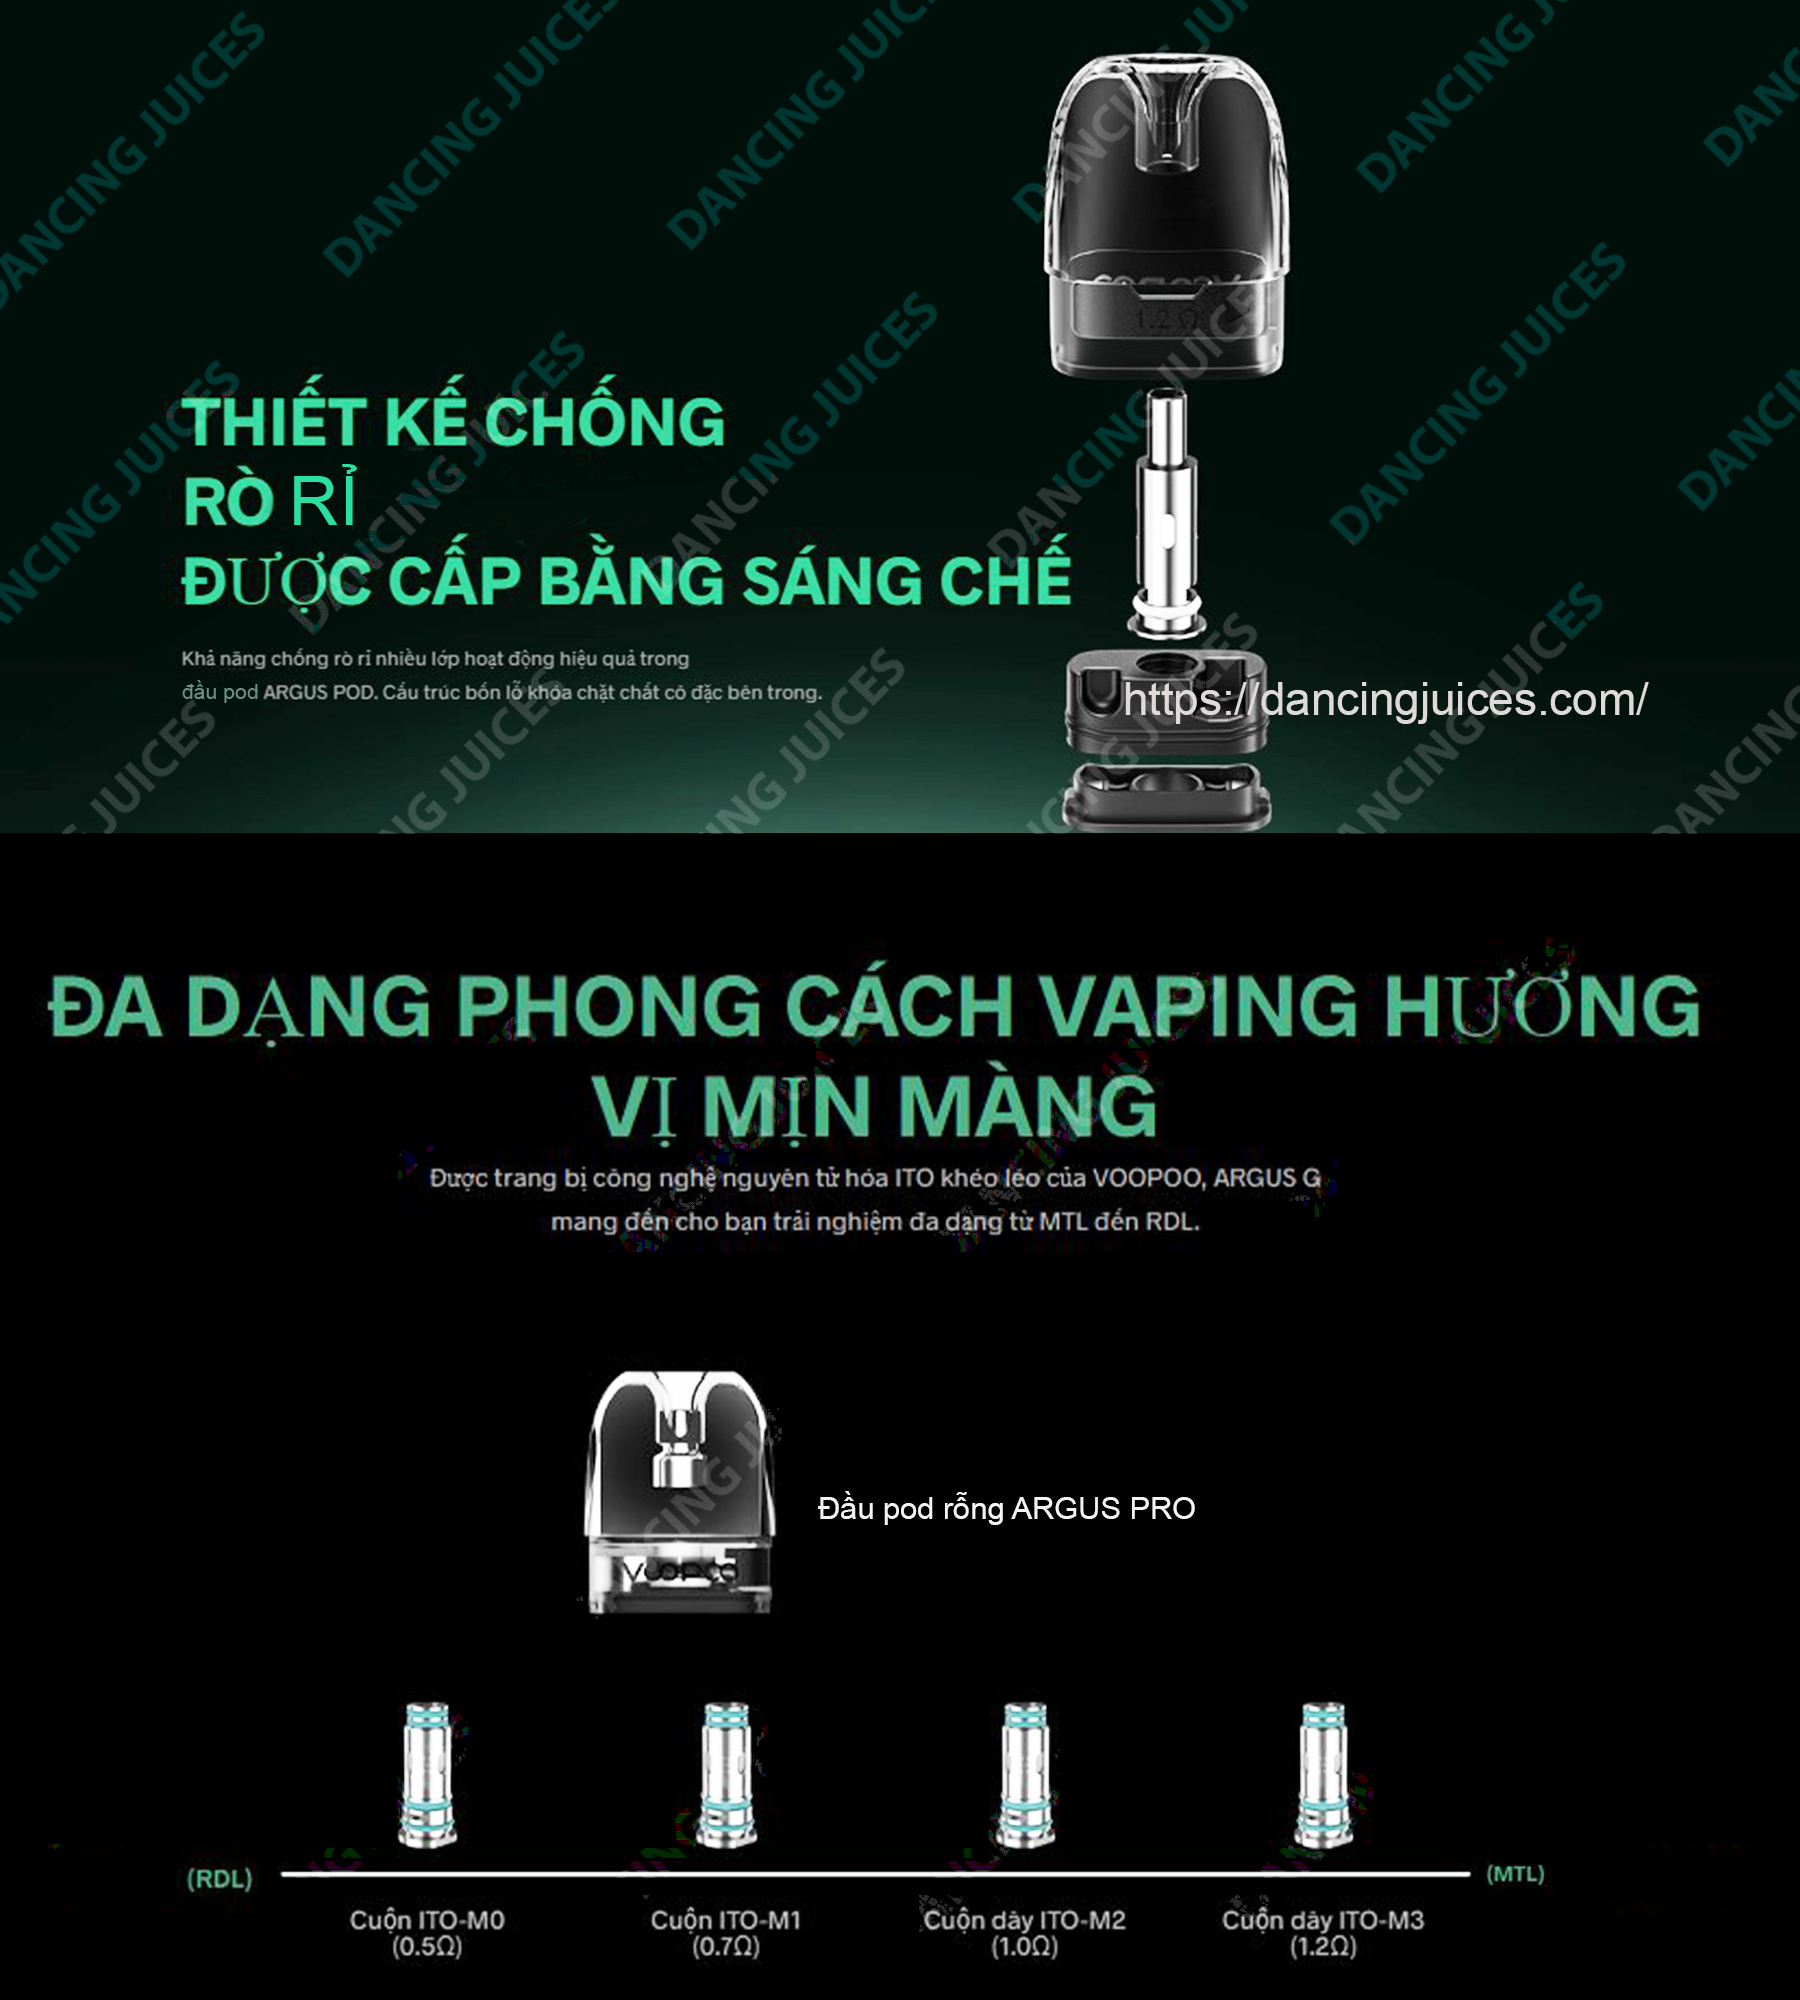 REVIEW VOOPOO Argus G Cong Nghe Nguyen Tu Hoa ITO Phone: 0971.829.269